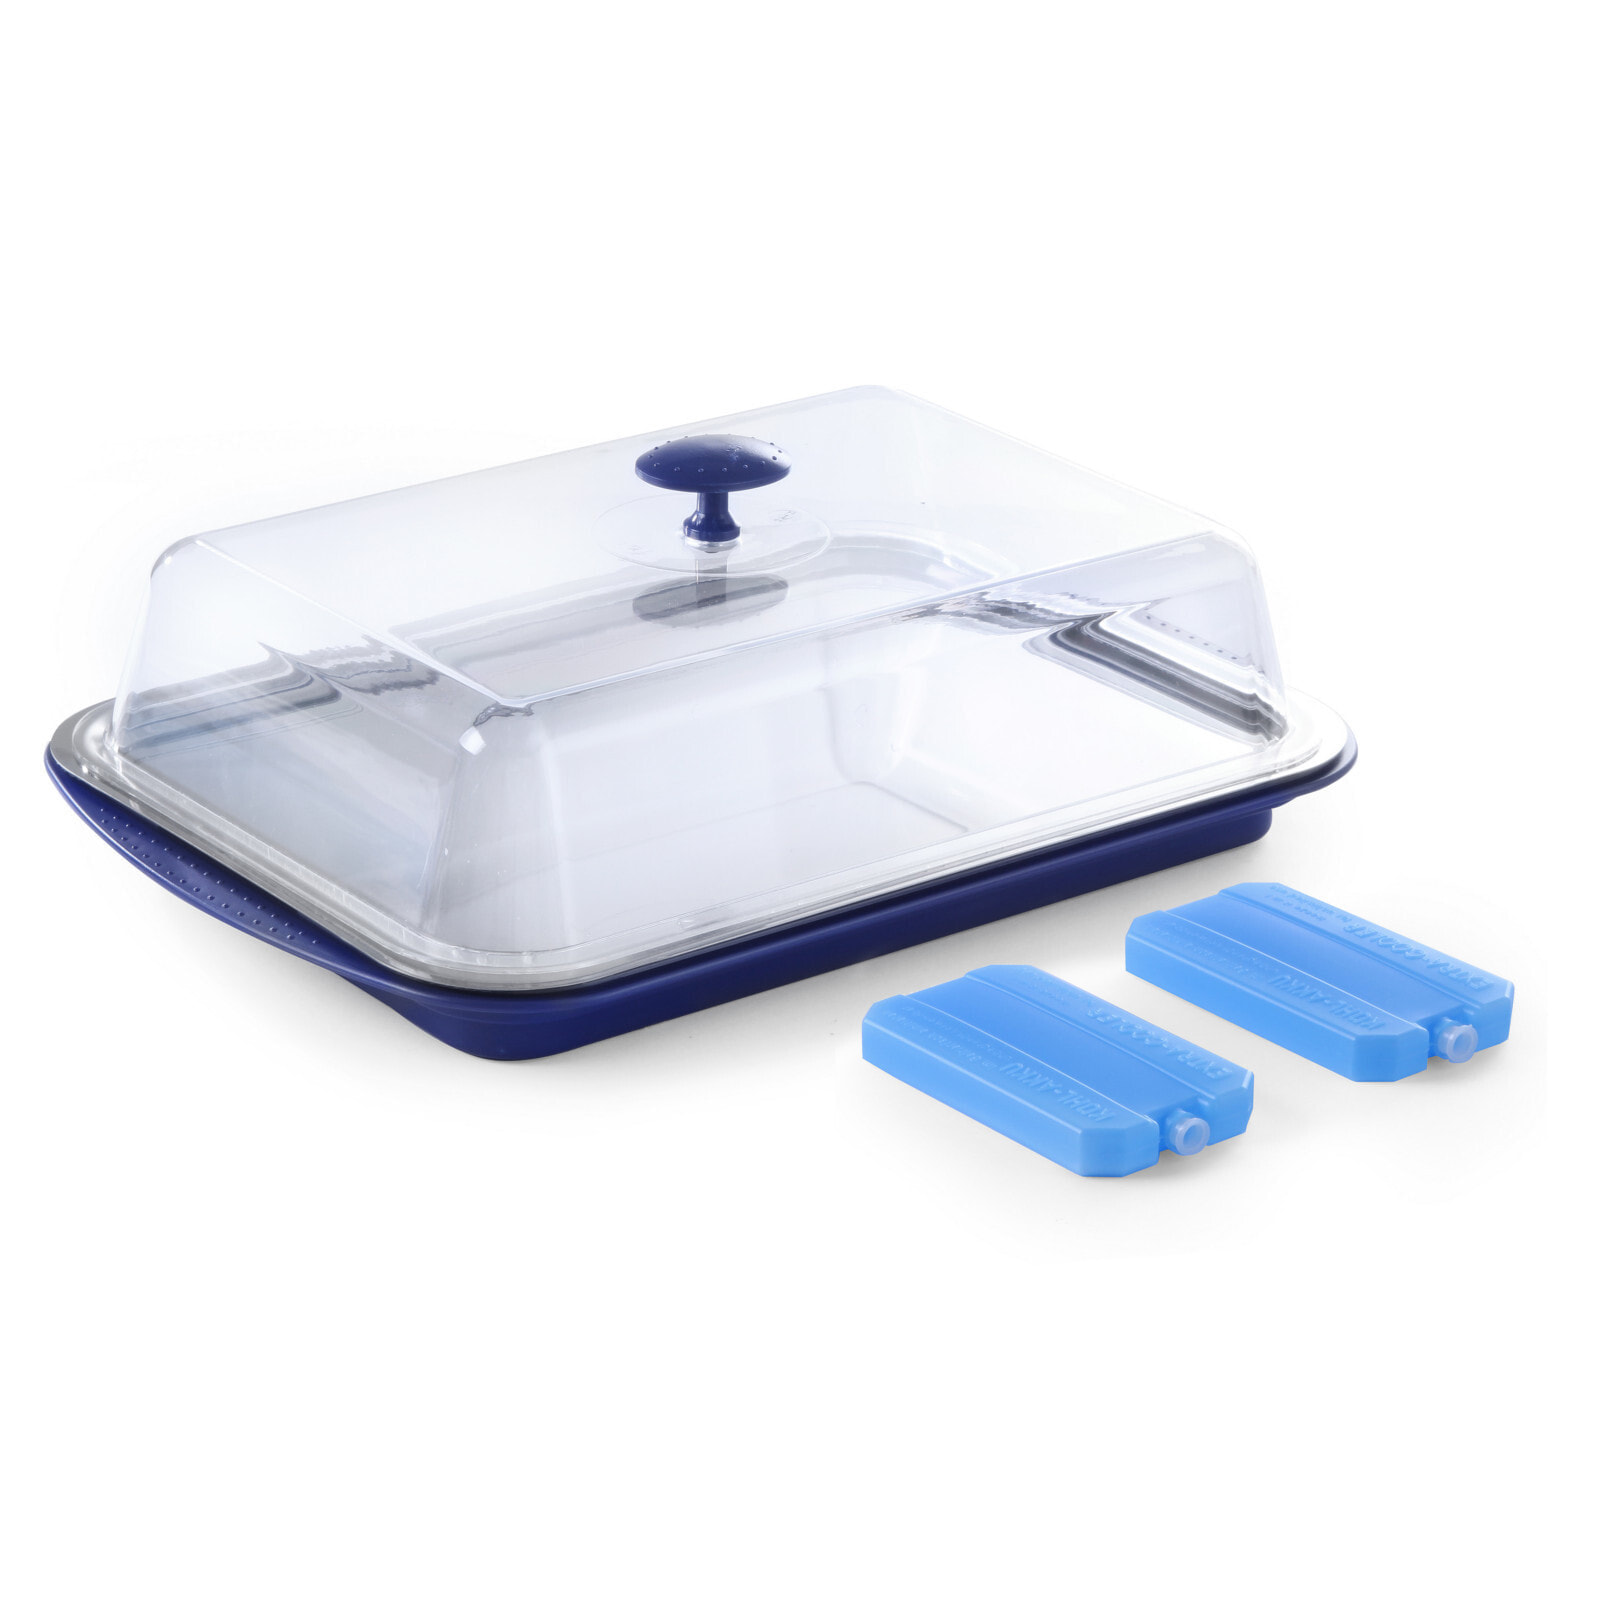 Cooled tray with lid 43x29cm - Hendi 424155